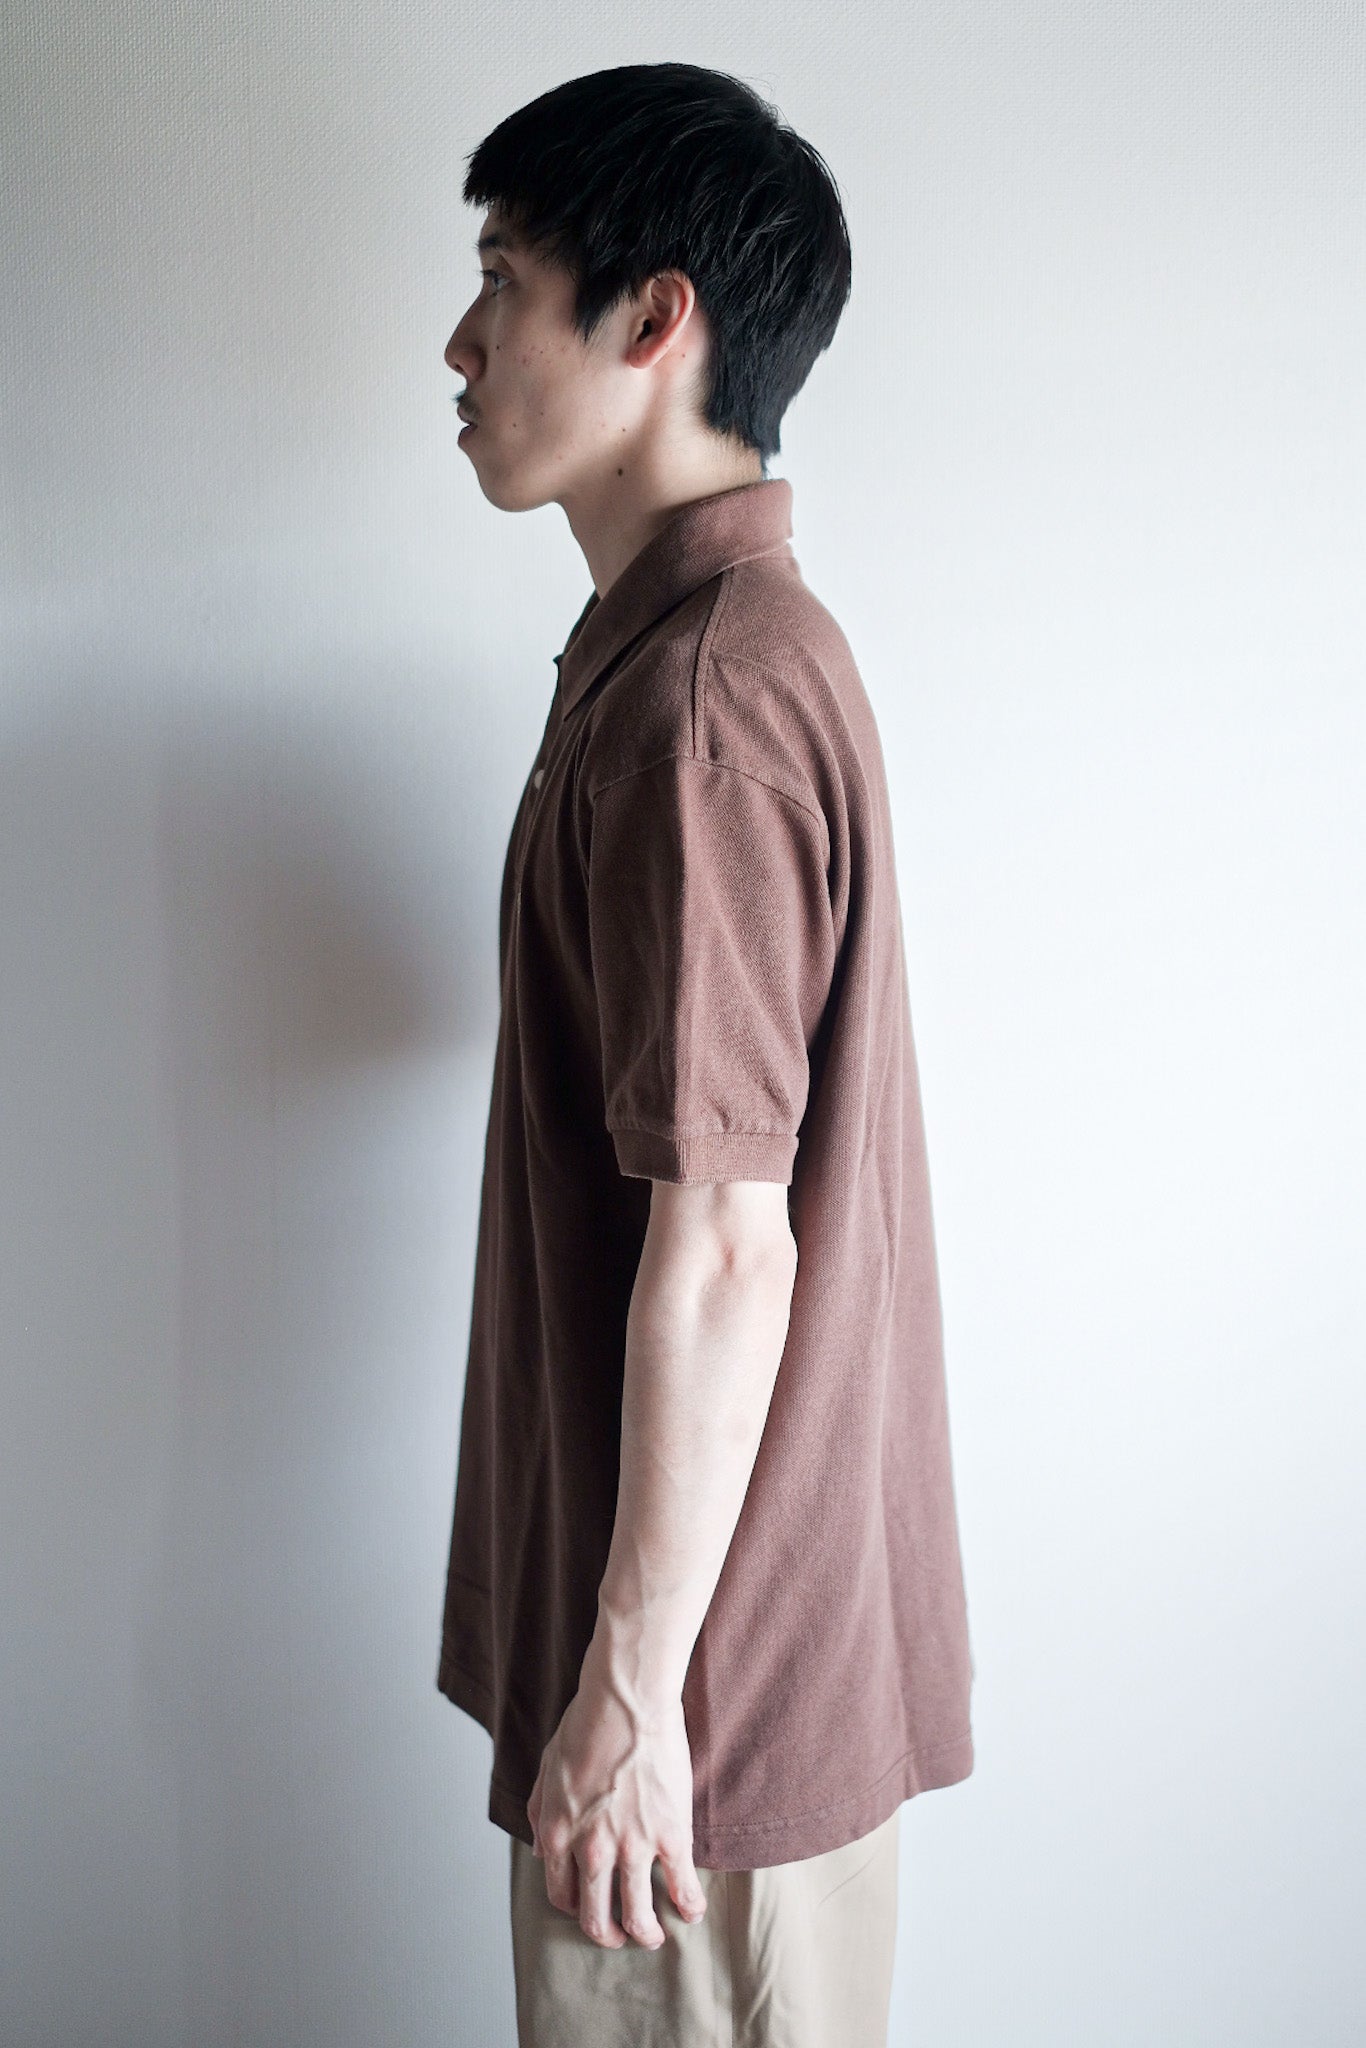 [~ 80's] Chemise Lacoste S/S Polo Size.6 "Brown"